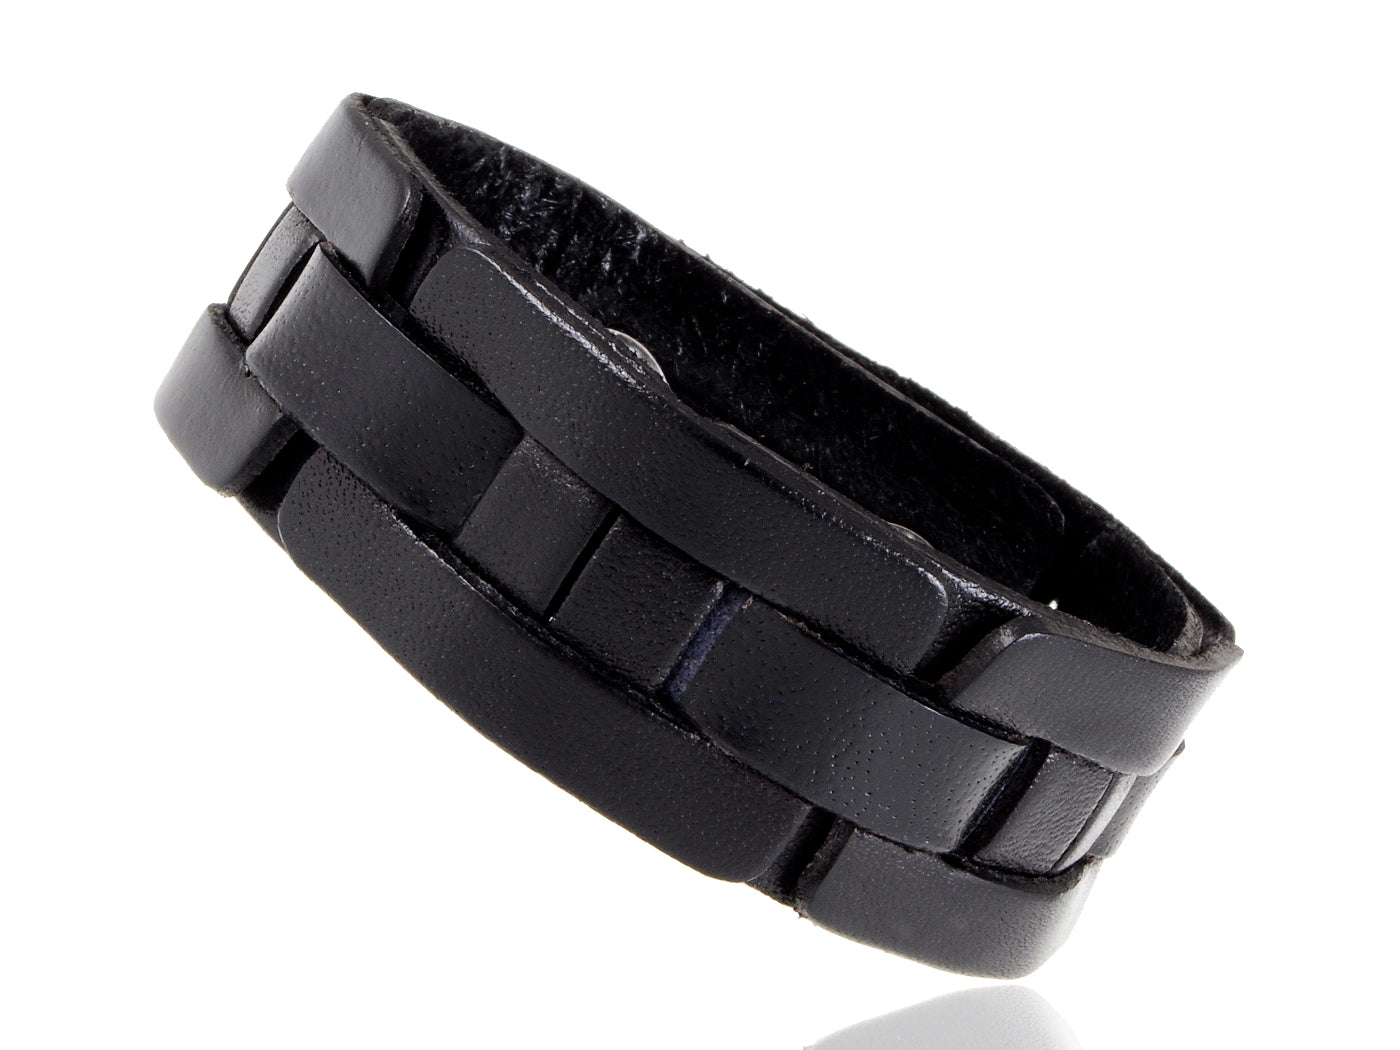 Black Leather Bracelet Cuff Braid Like Style With Snap Closure